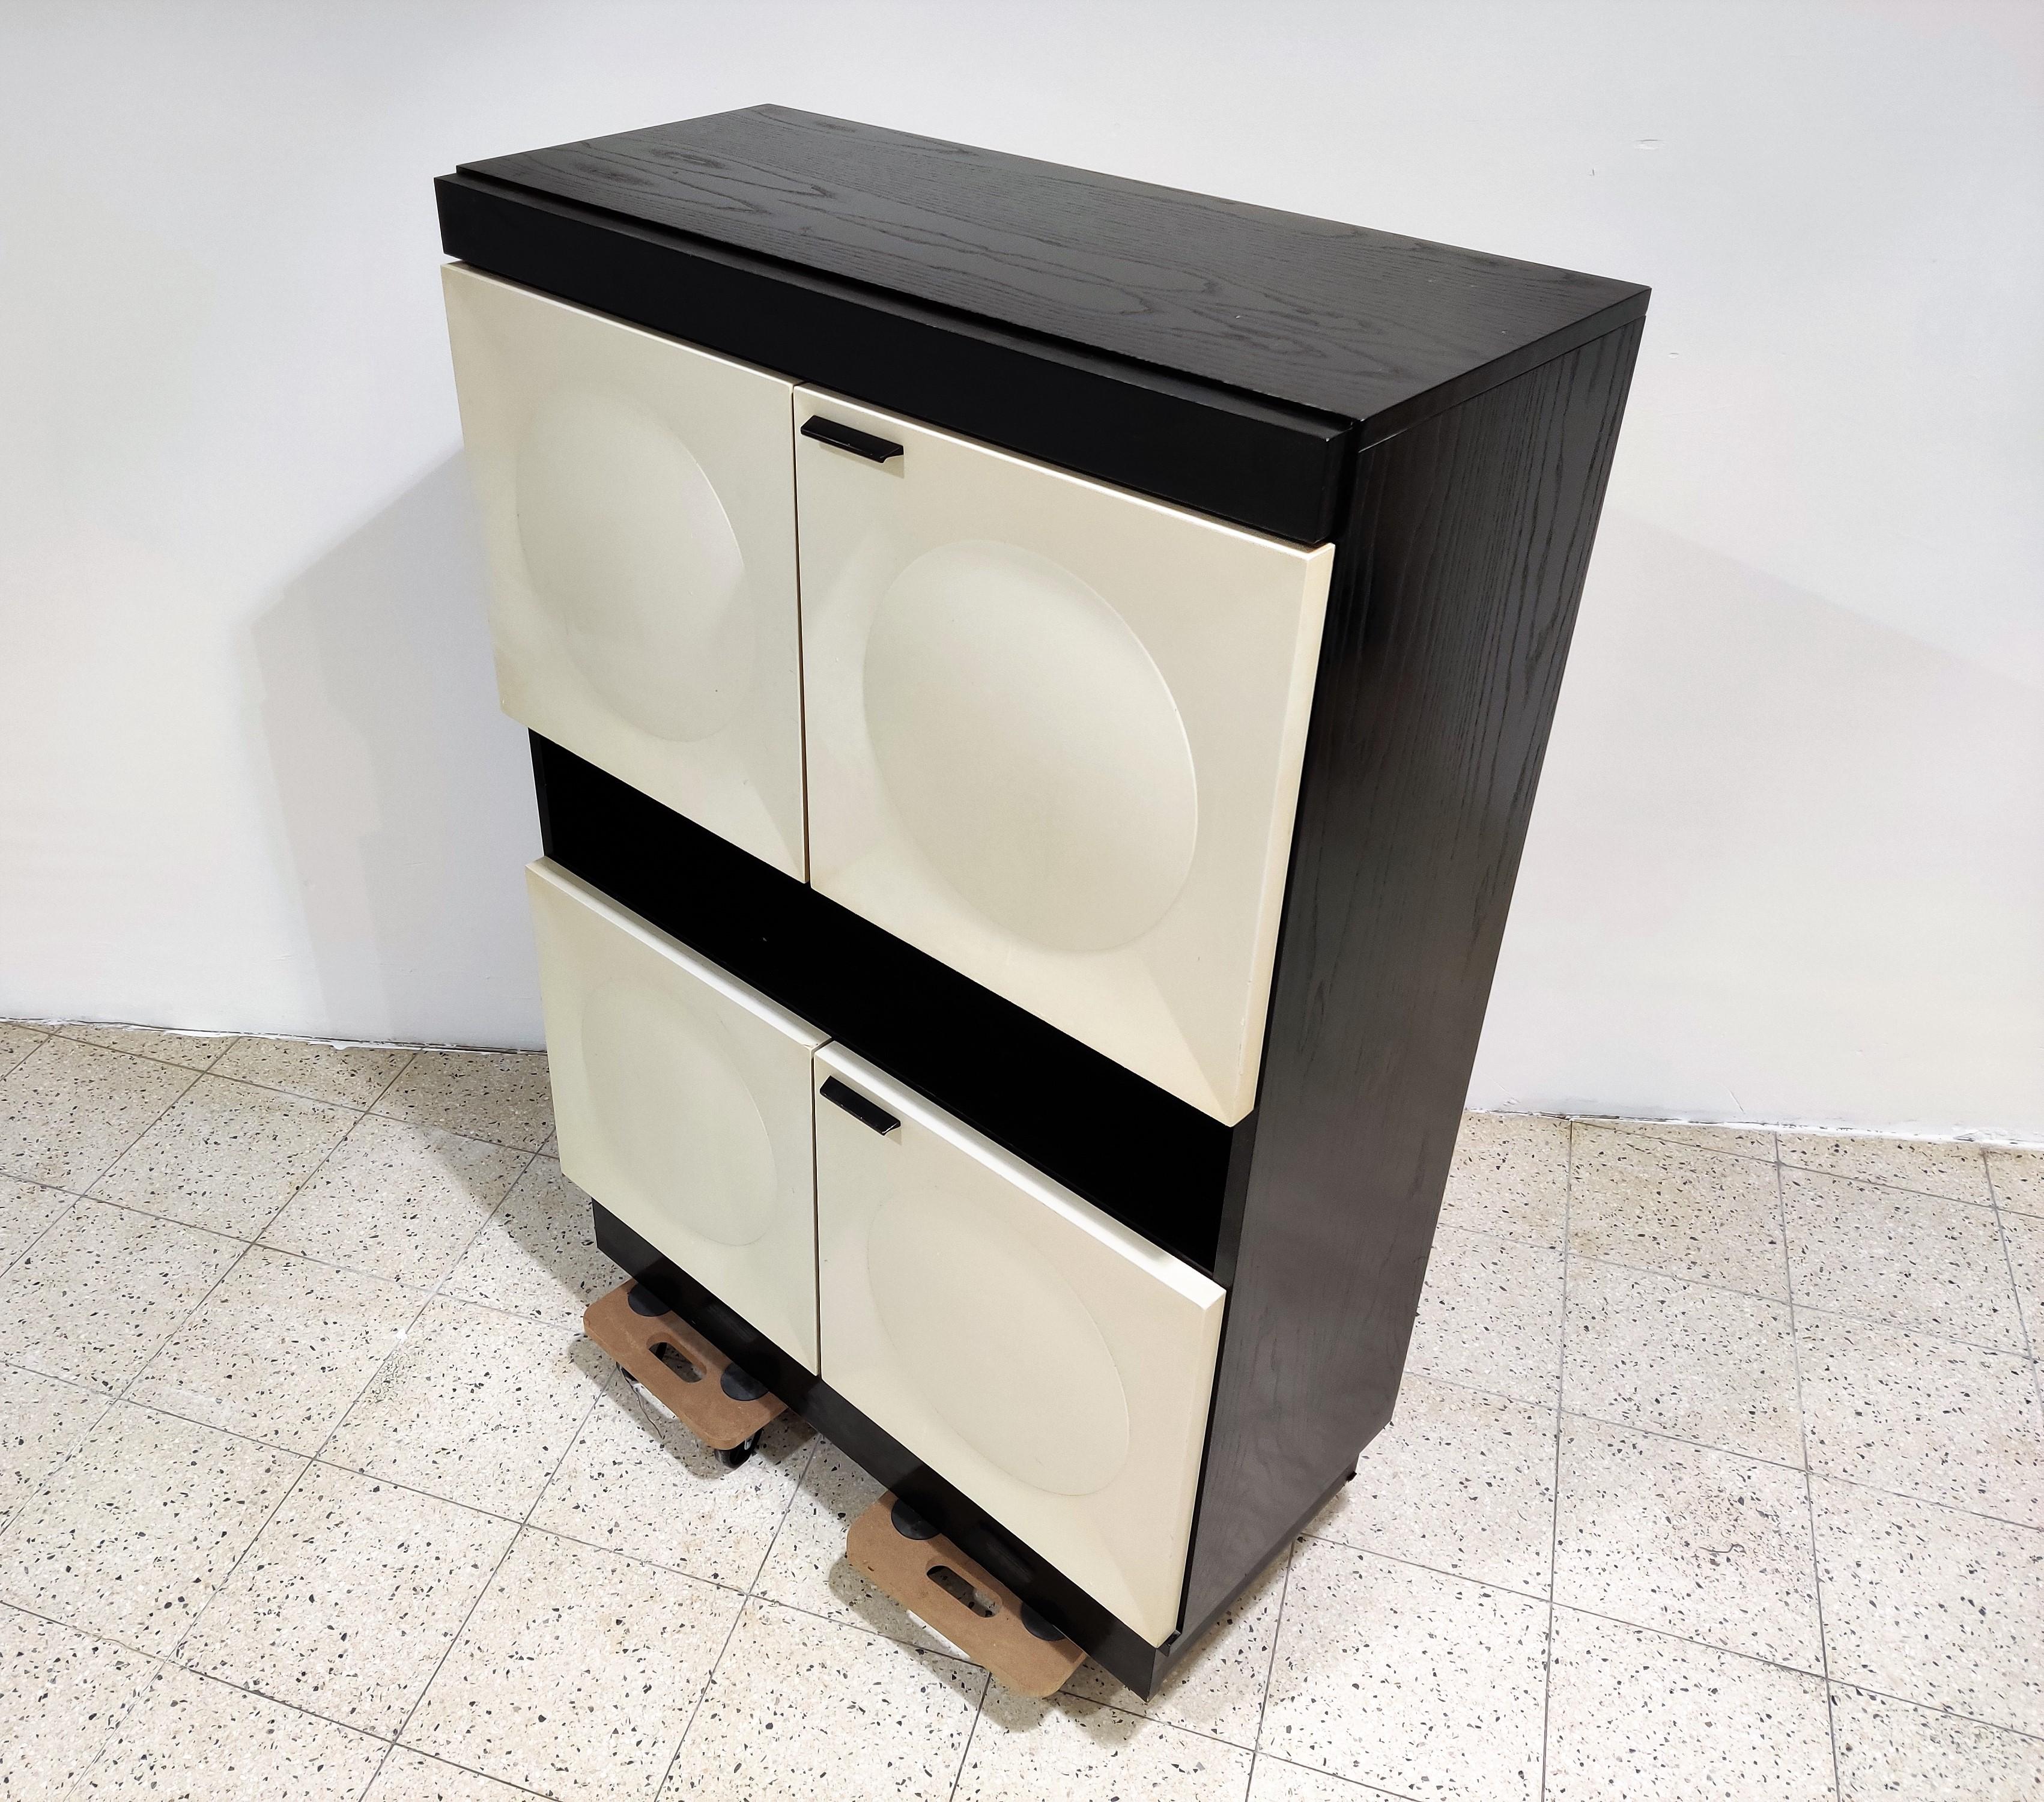 Beautiful black wooden Brutalist bar cabinet with 4 white lacquered doors.

The cabinet has a light on the inside.

Beautiful timeless design.

Good condition.

1970s, Belgium

Dimensions:
Height 145cm/57.08